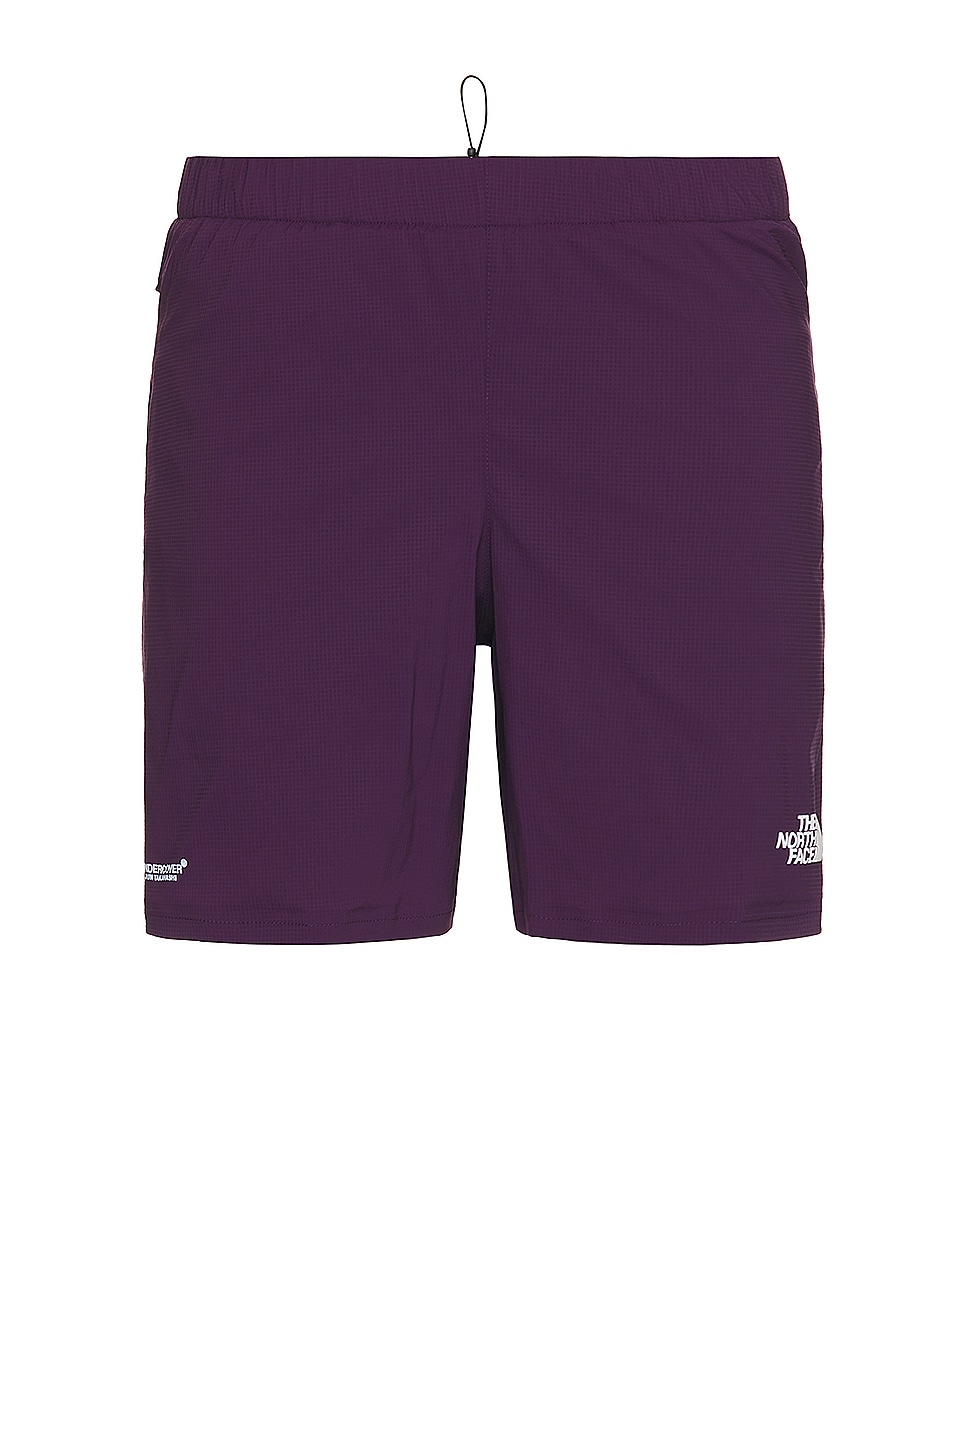 Image 1 of The North Face Soukuu Trail Run Utility 2-in-1 Shorts in Purple Pennat